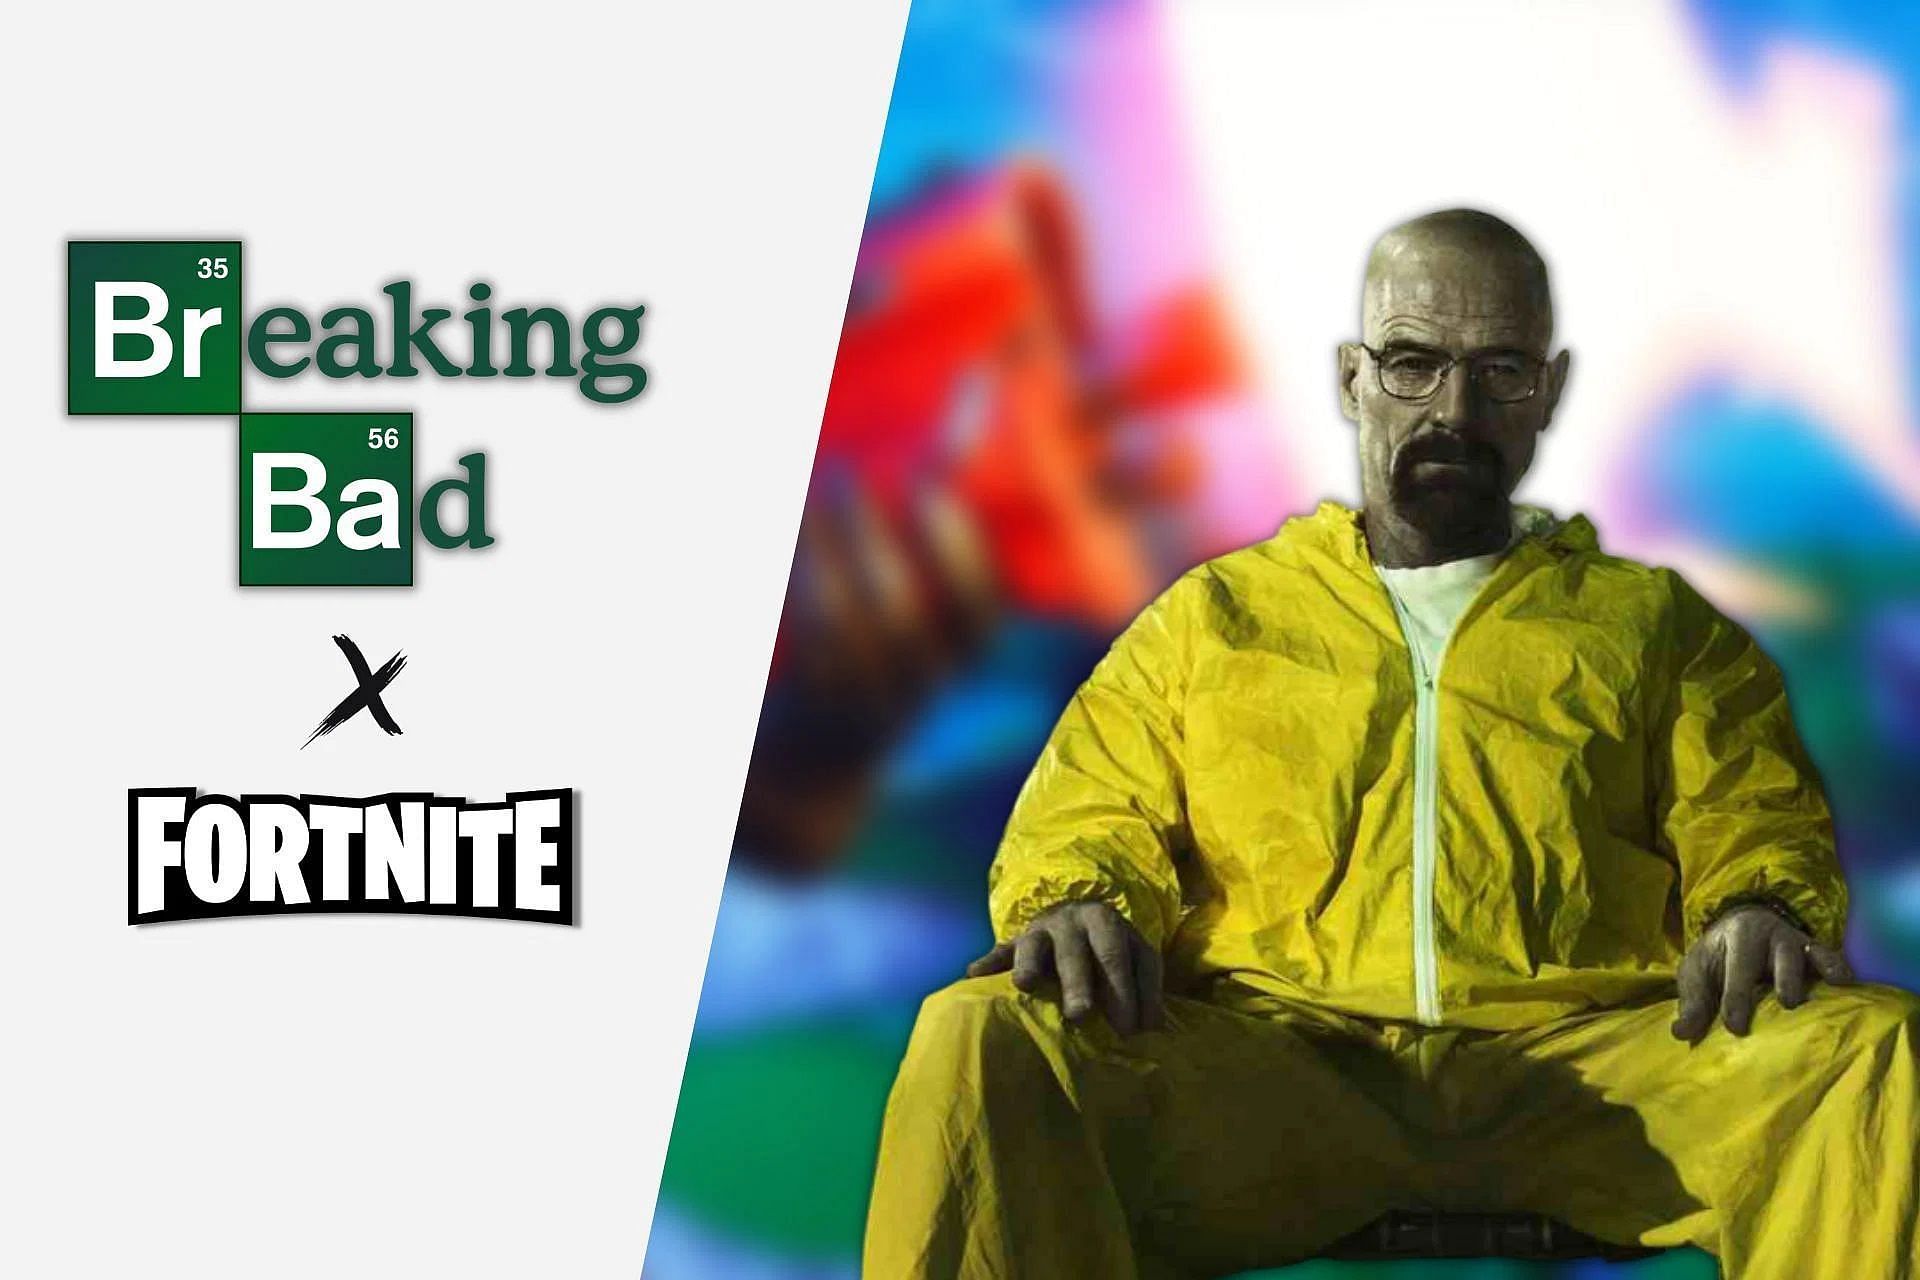 Will Fortnite finally get a &quot;Breaking Bad&quot; collaboration? (Image via Sportskeeda)